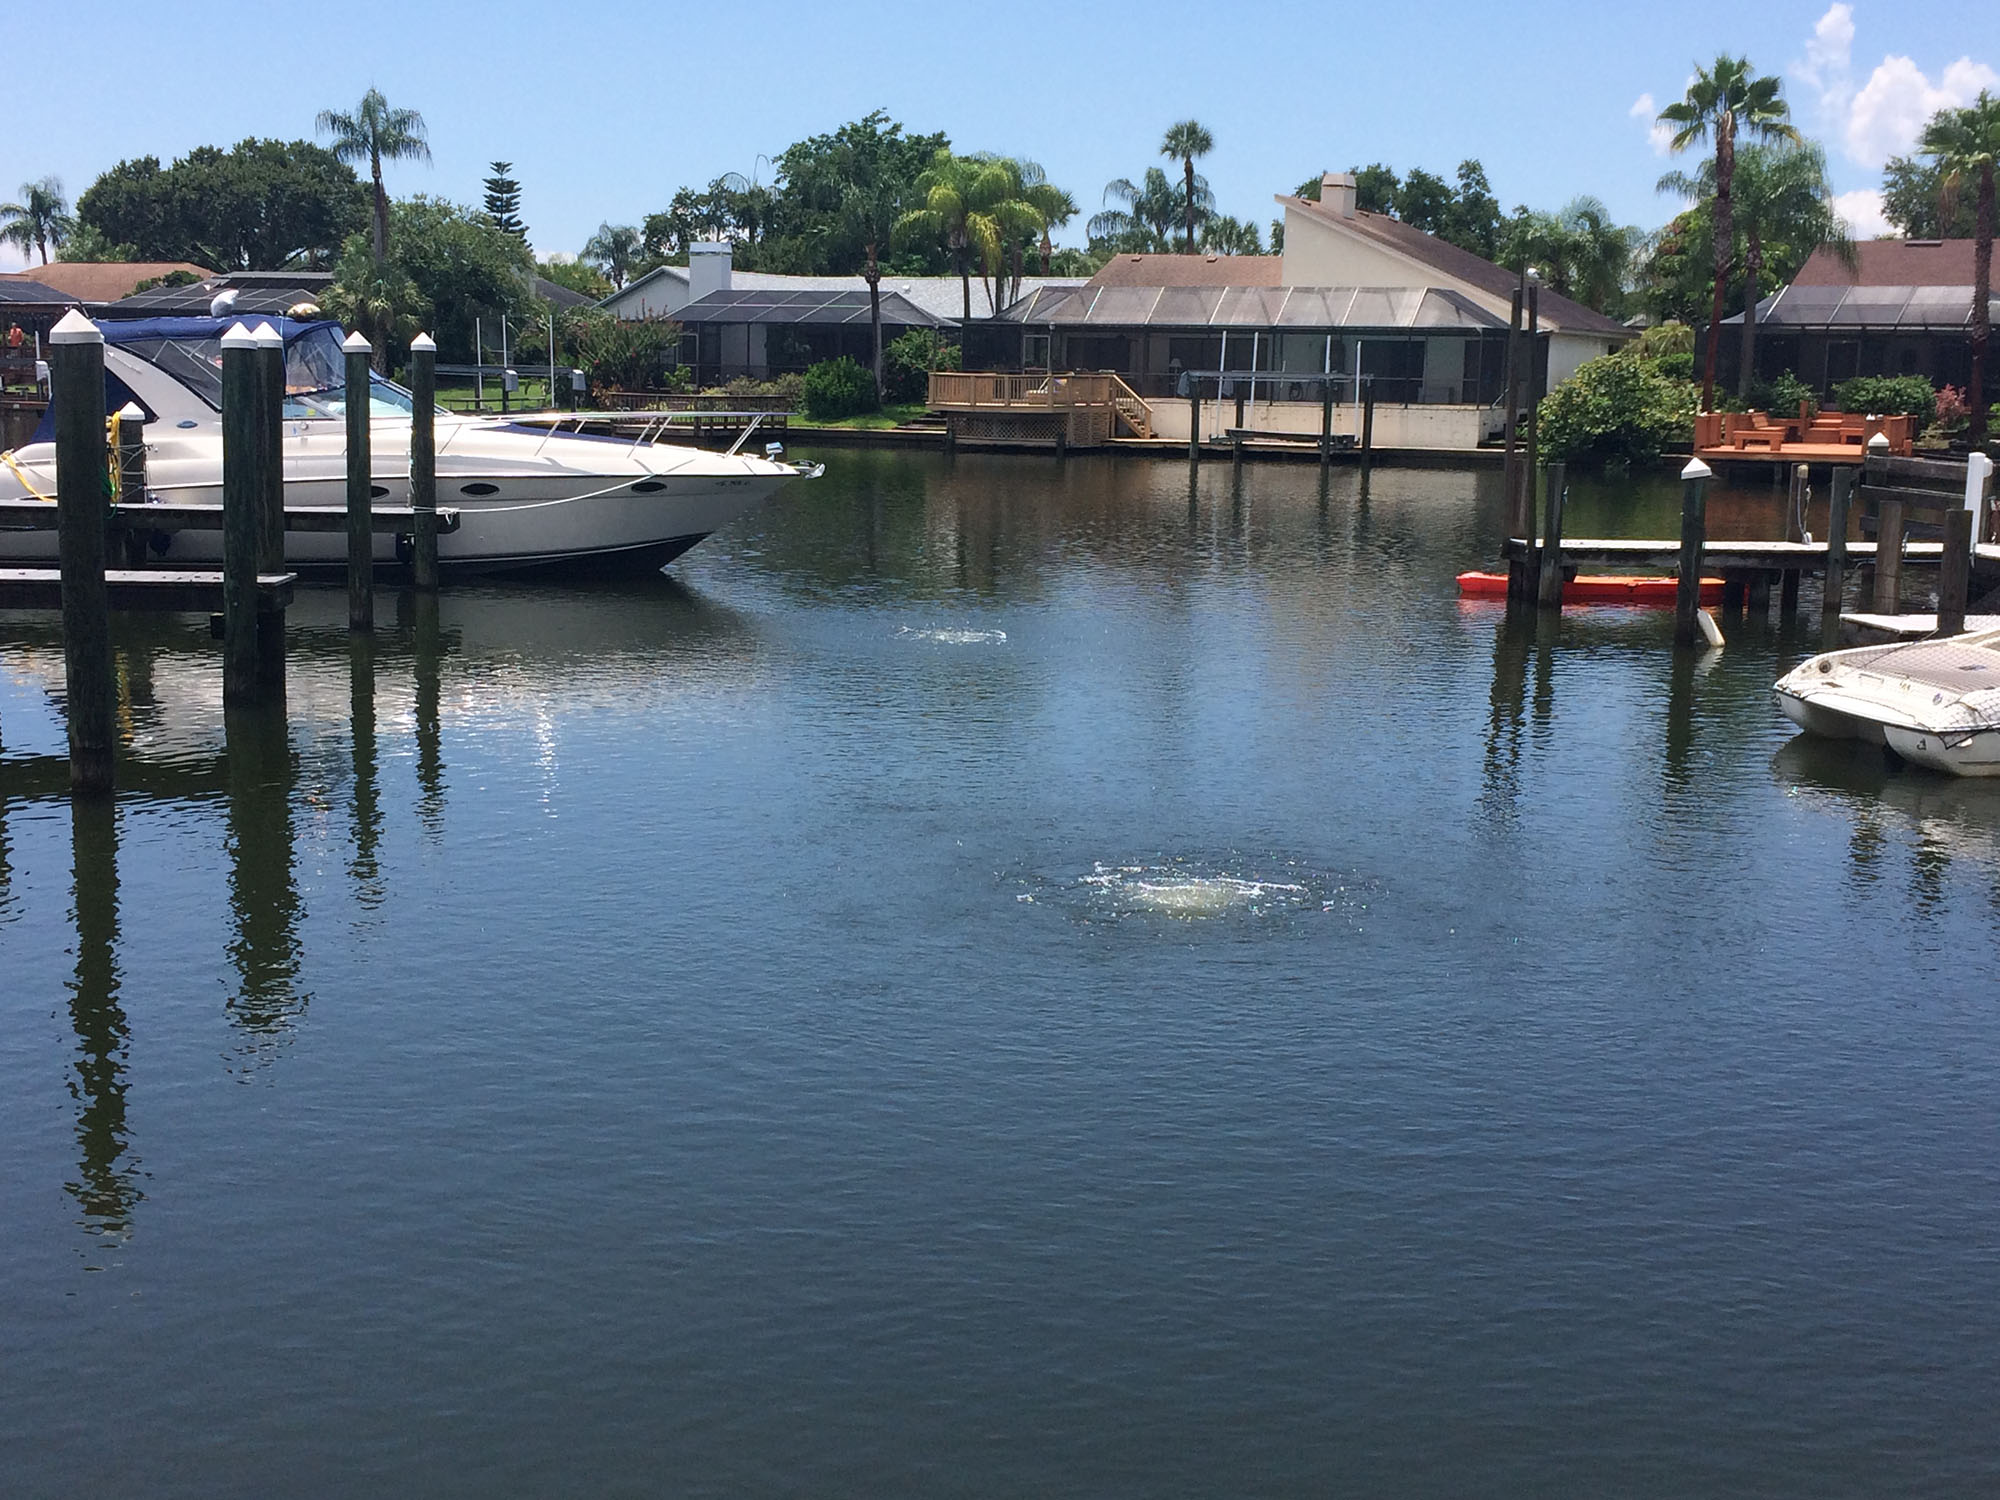 Aeration system in residential marina. Note bubbles rising from bottom diffuser to surface.